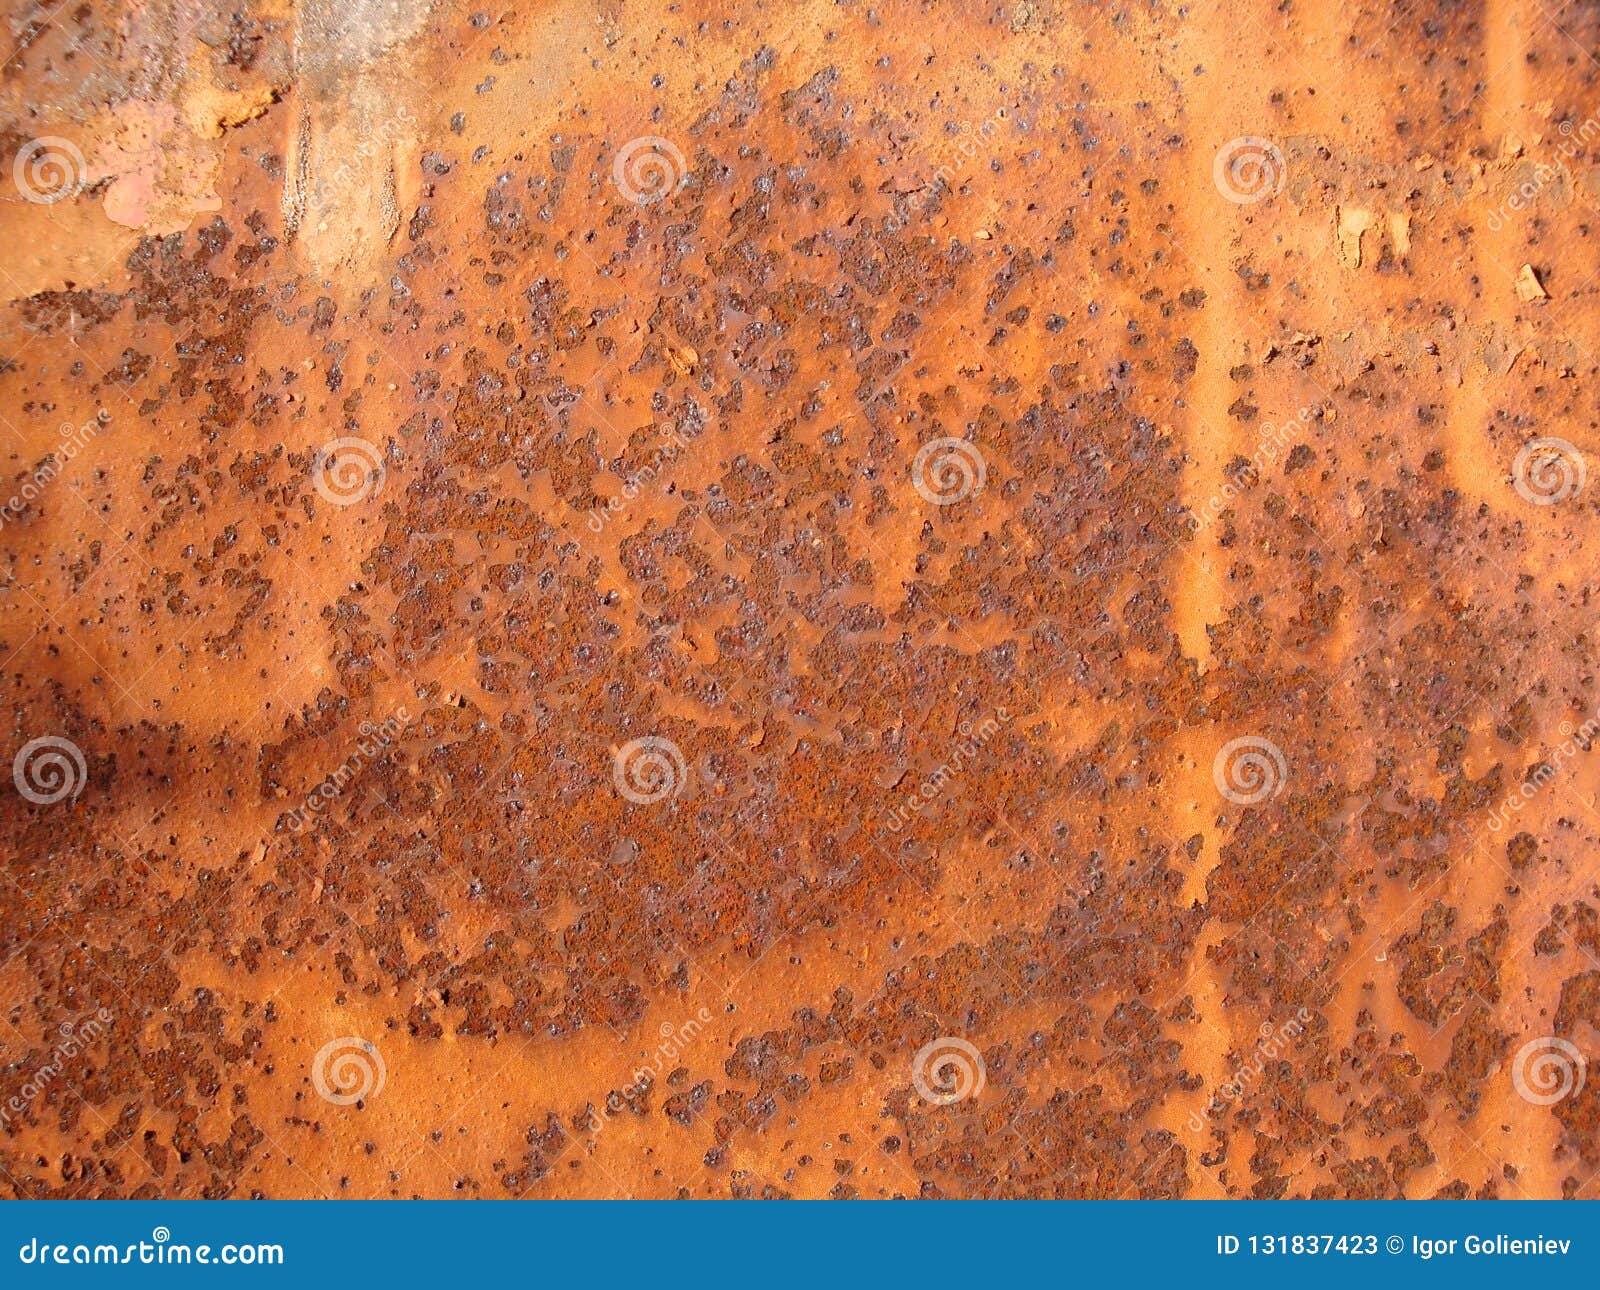 grunge rusted metal texture. rusty corrosion and oxidized background.